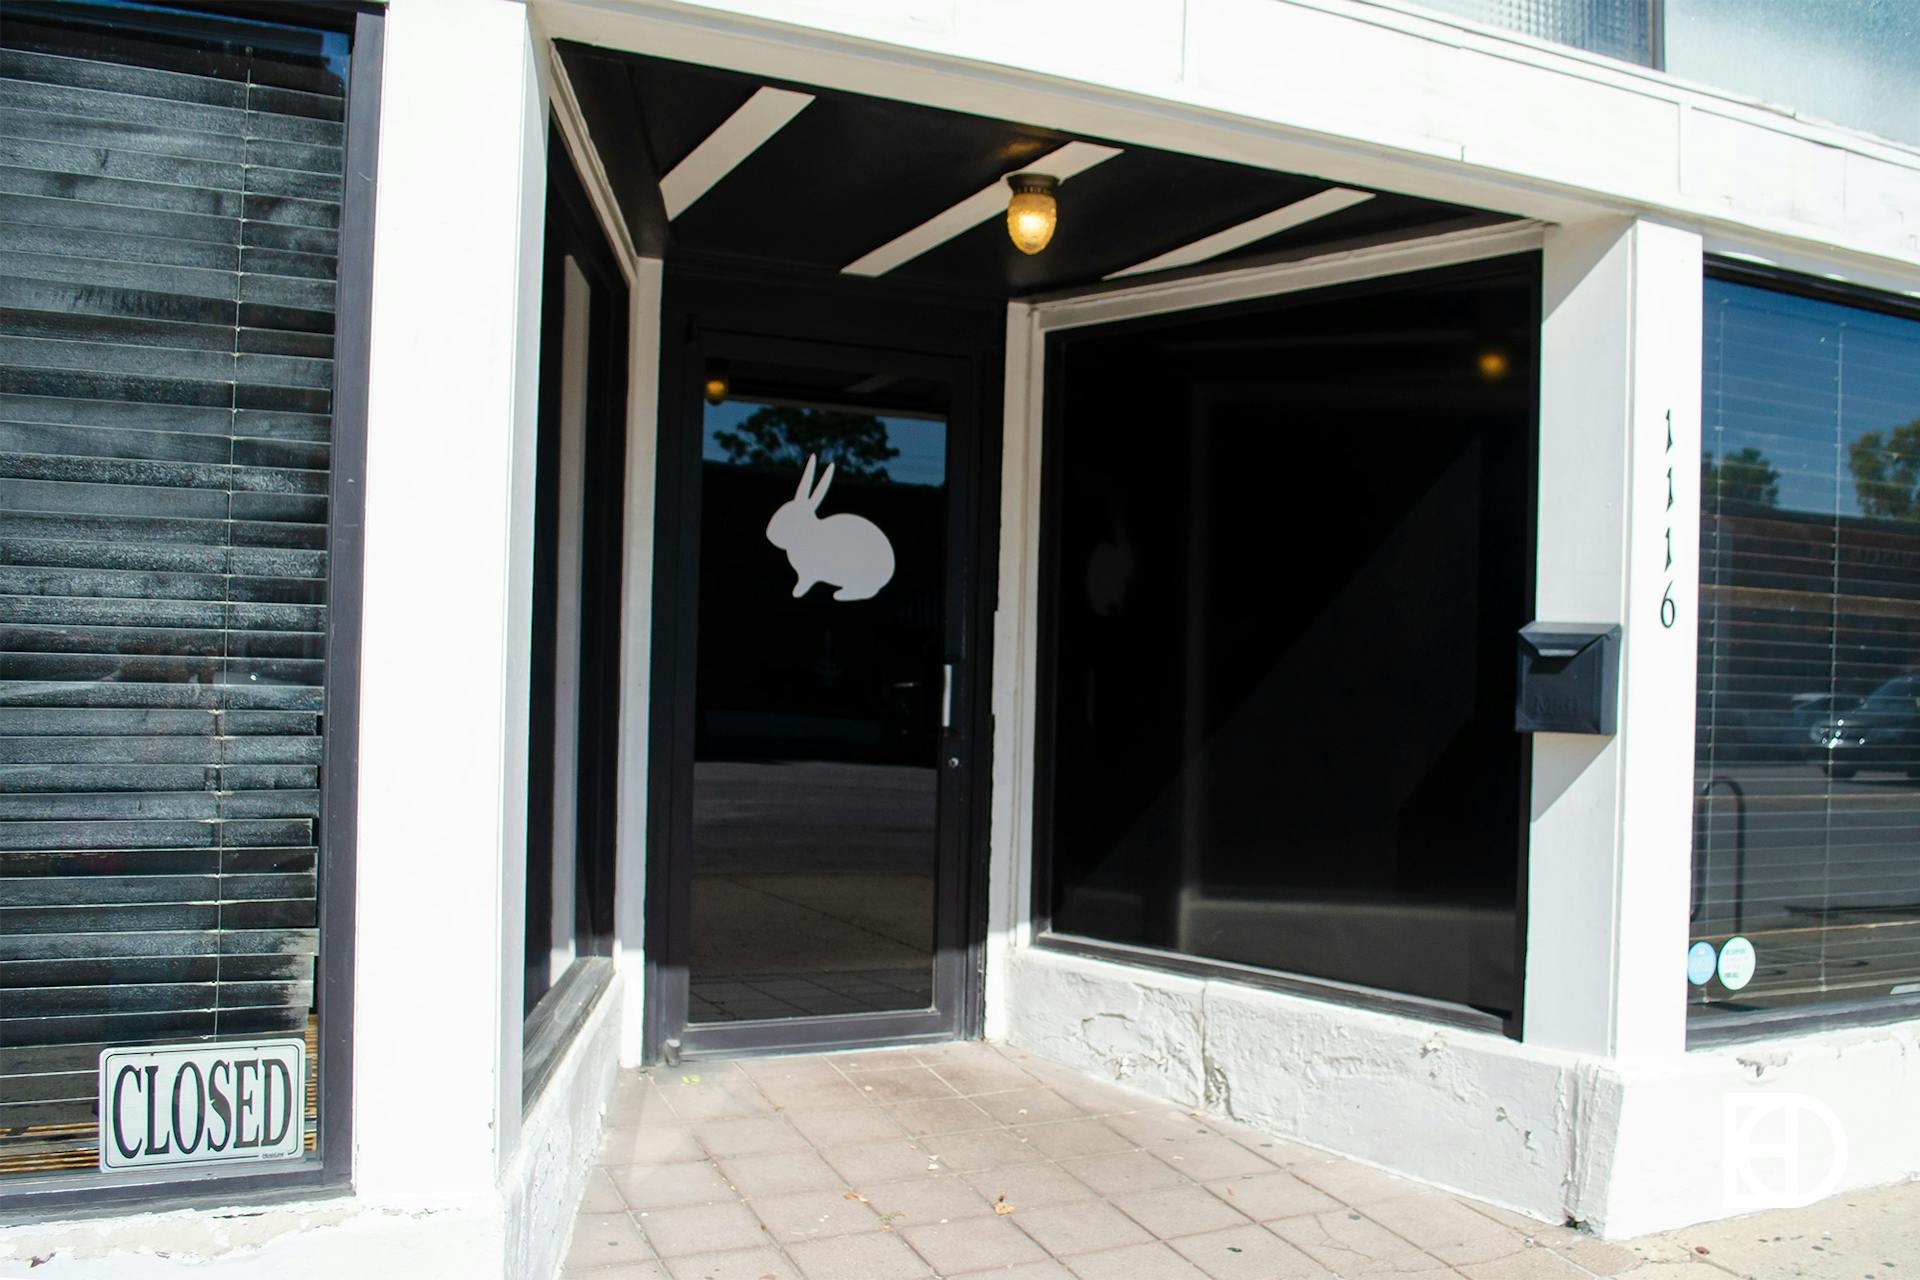 Photo of the entrance of the White Rabbit in Fountain Square